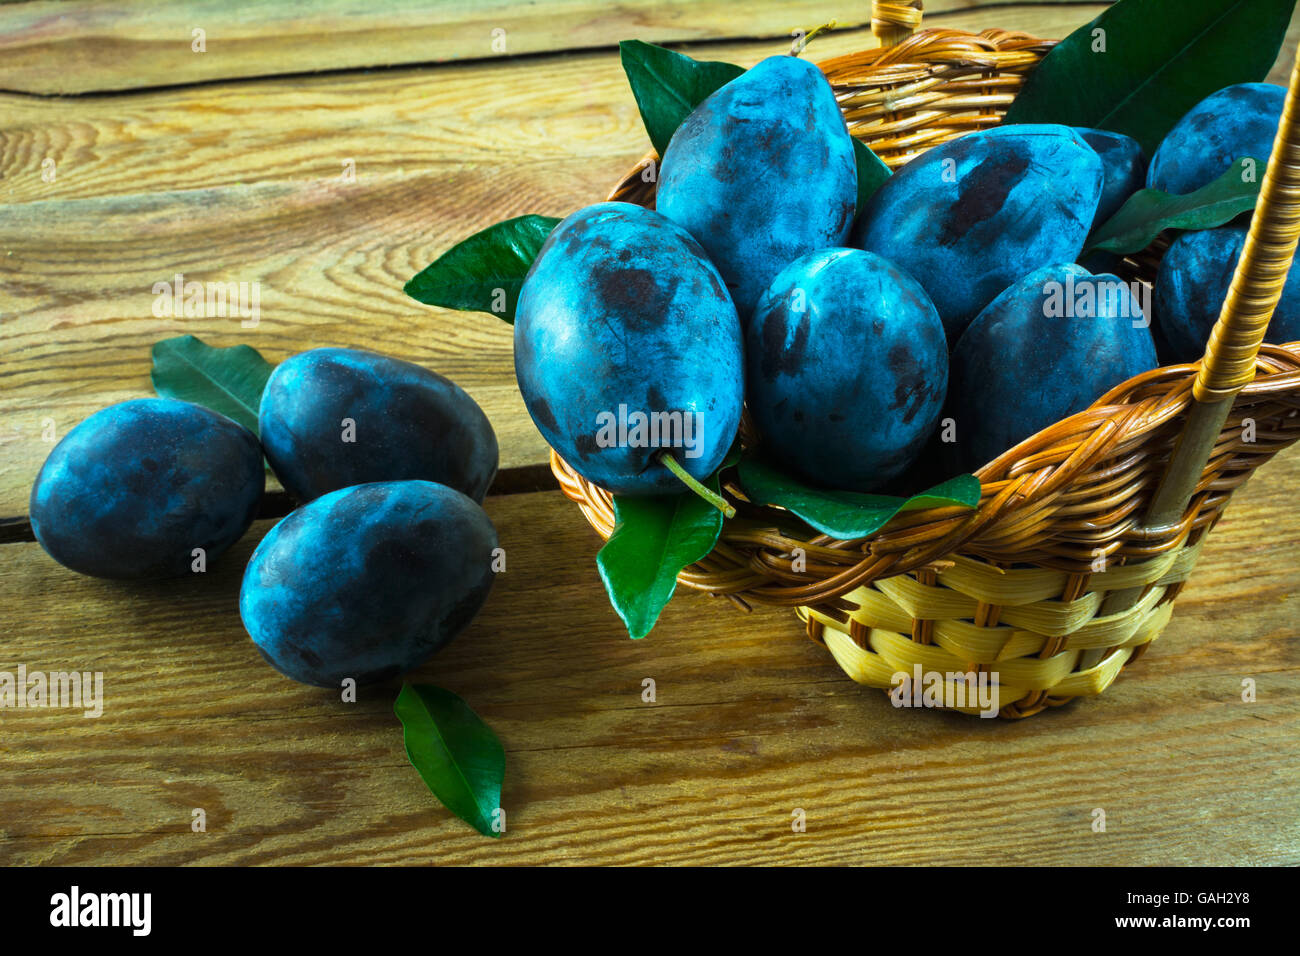 Fruit plum prunes in a basket on a wooden table, close up. Selective focus Stock Photo